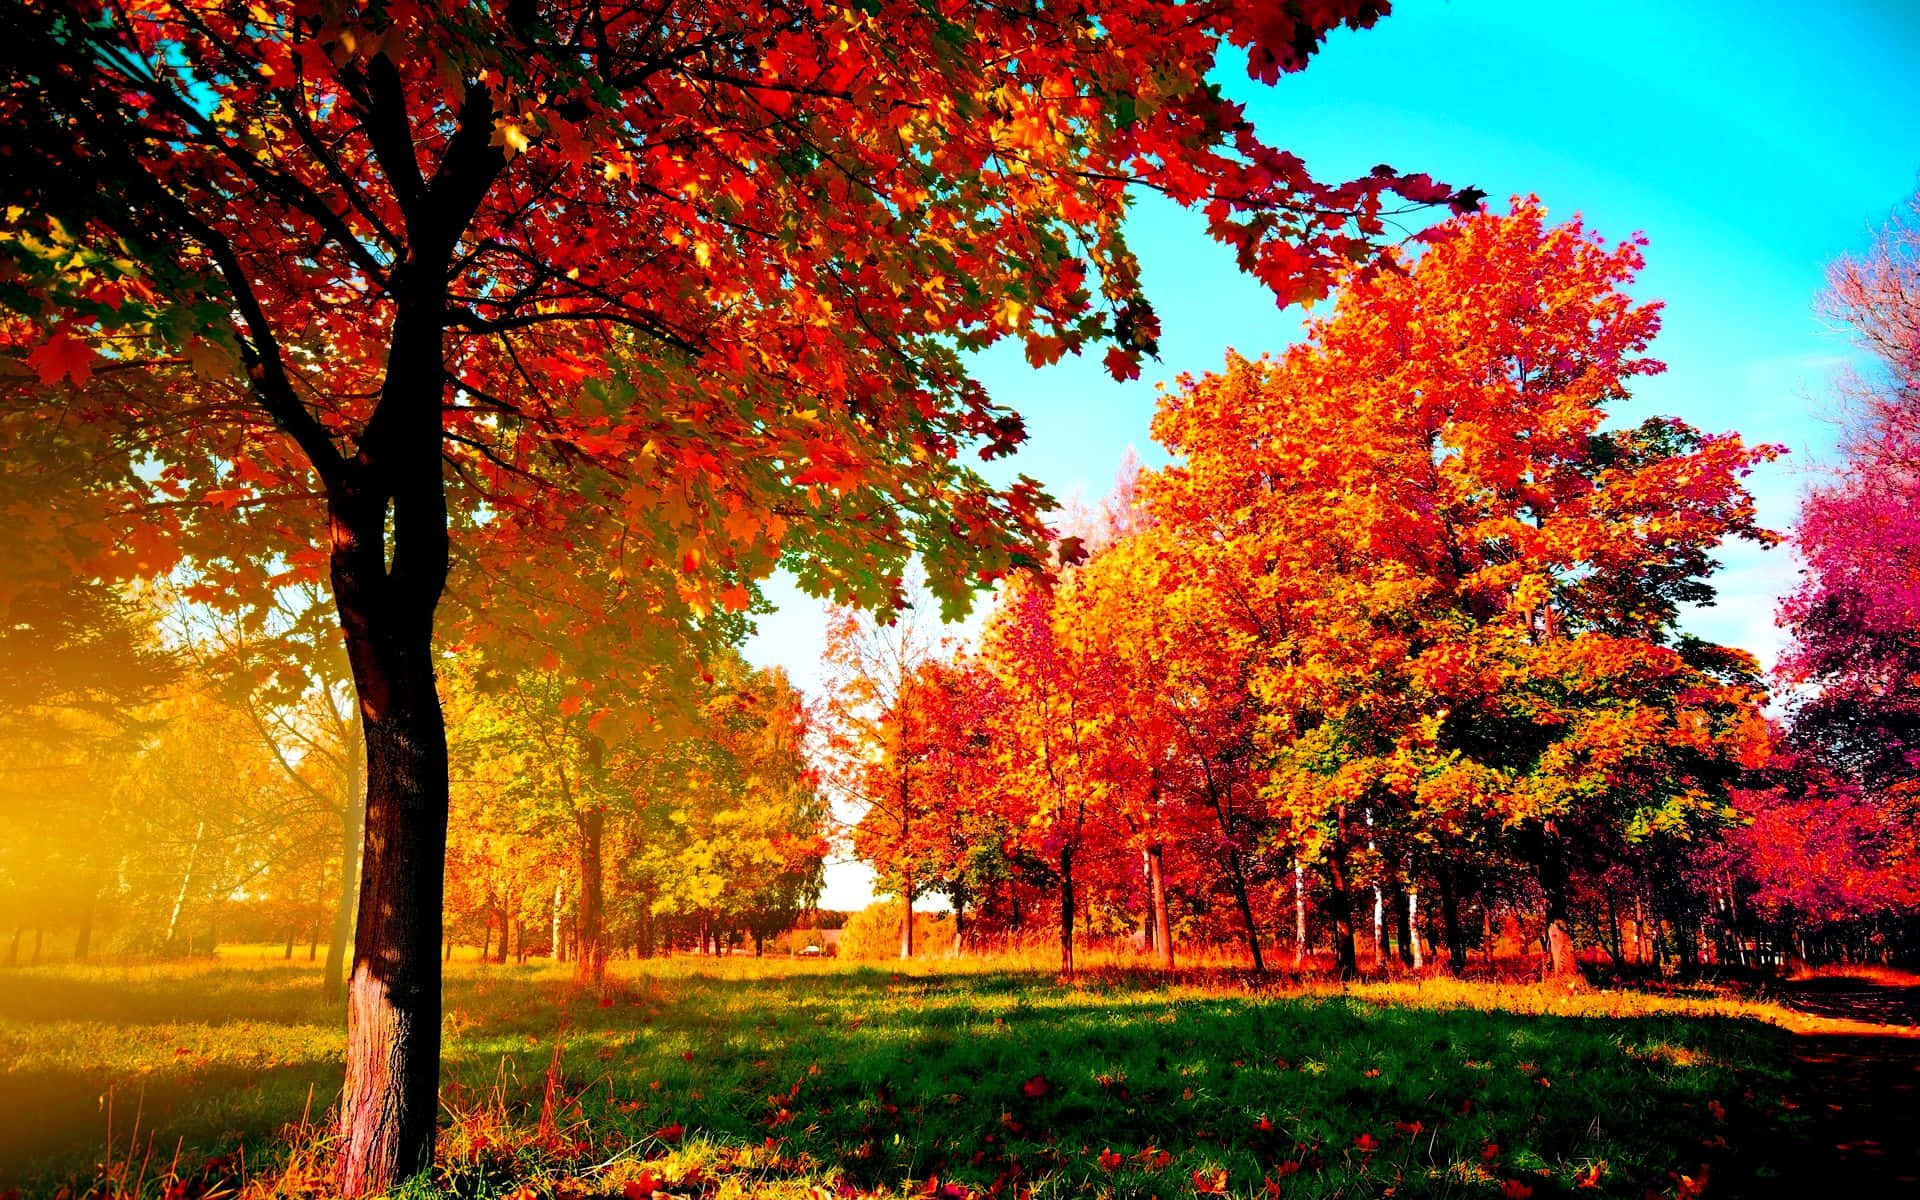 "Take in the Details - Enjoy the Colorful Fall Desktop"